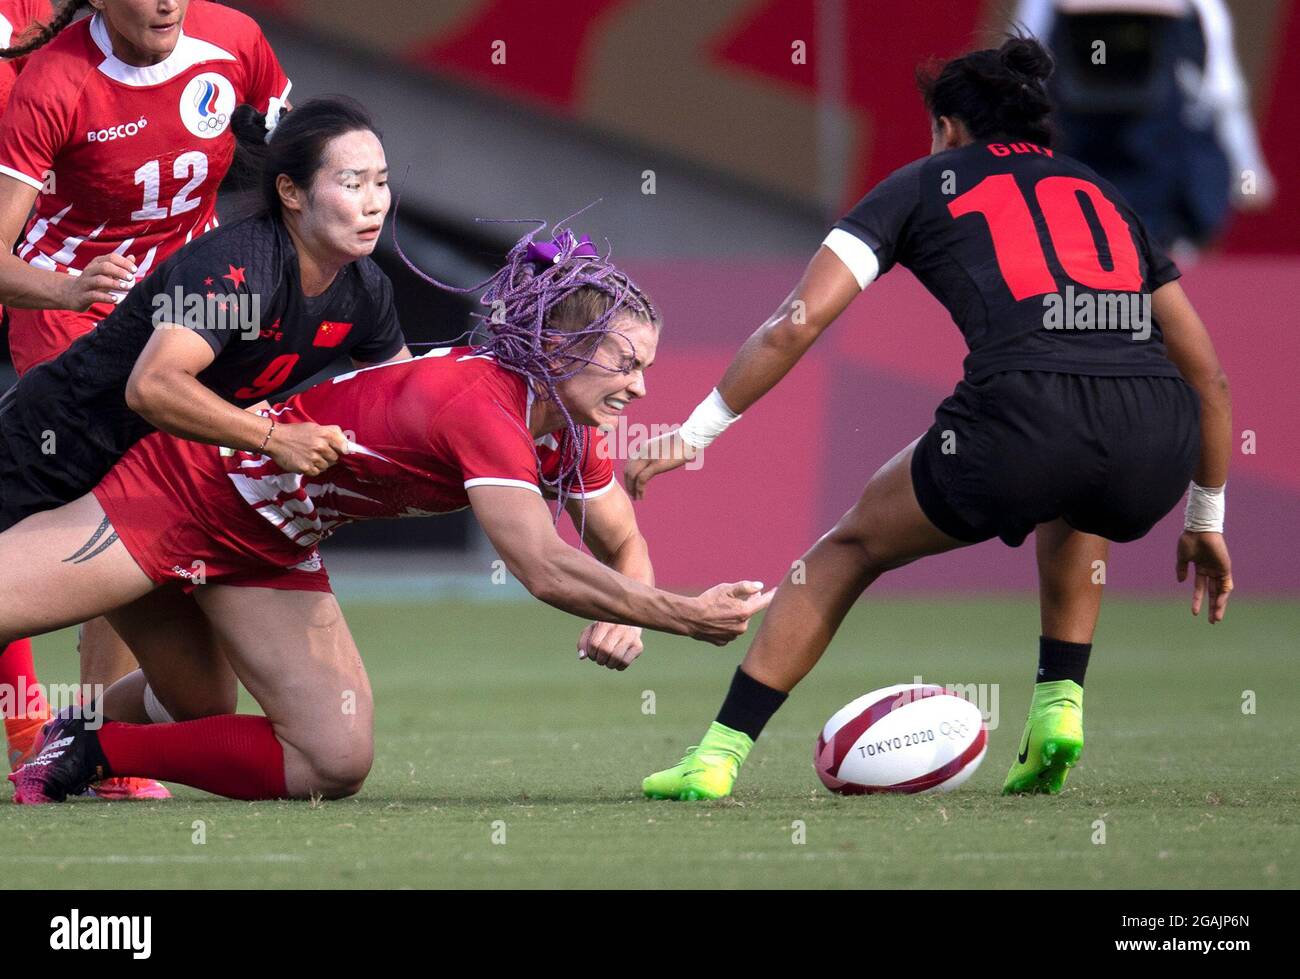 Tokyo, Japan. 31st July, 2021. Yang Feifei (2nd L) of China competes with Alena Tiron (2nd R) of ROC during the women's placing 7-8 match of rugby sevens between China and ROC at the Tokyo 2020 Olympic Games in Tokyo, Japan, July 31, 2021. Credit: Fei Maohua/Xinhua/Alamy Live News Stock Photo